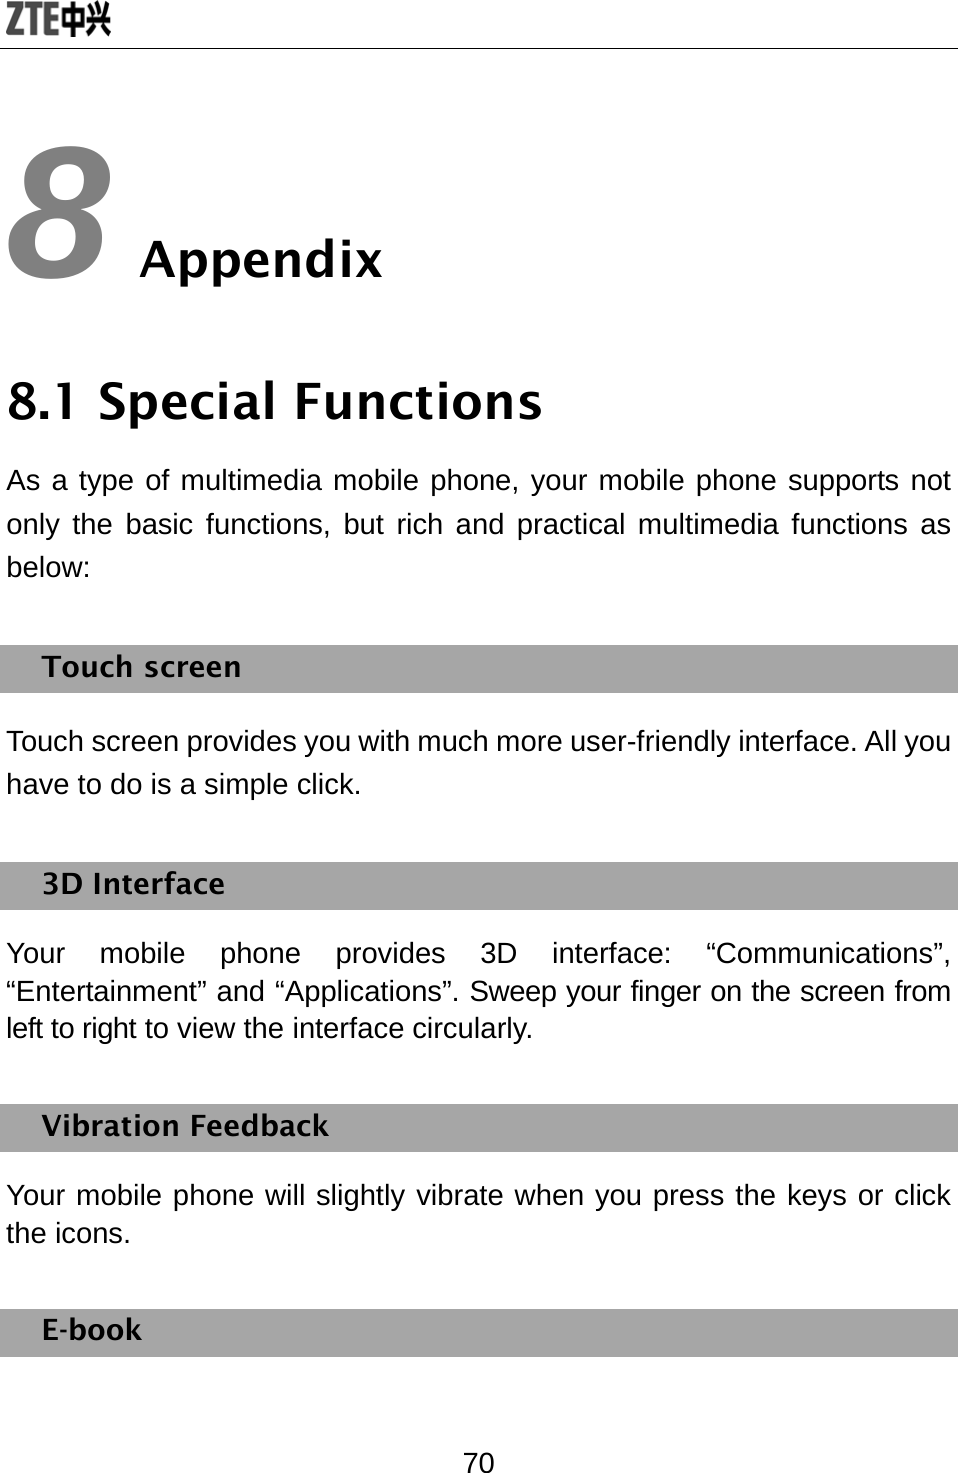  70 8 Appendix 8.1 Special Functions As a type of multimedia mobile phone, your mobile phone supports not only the basic functions, but rich and practical multimedia functions as below:  Touch screen Touch screen provides you with much more user-friendly interface. All you have to do is a simple click.   3D Interface Your mobile phone provides 3D interface: “Communications”, “Entertainment” and “Applications”. Sweep your finger on the screen from left to right to view the interface circularly.   Vibration Feedback Your mobile phone will slightly vibrate when you press the keys or click the icons.   E-book 